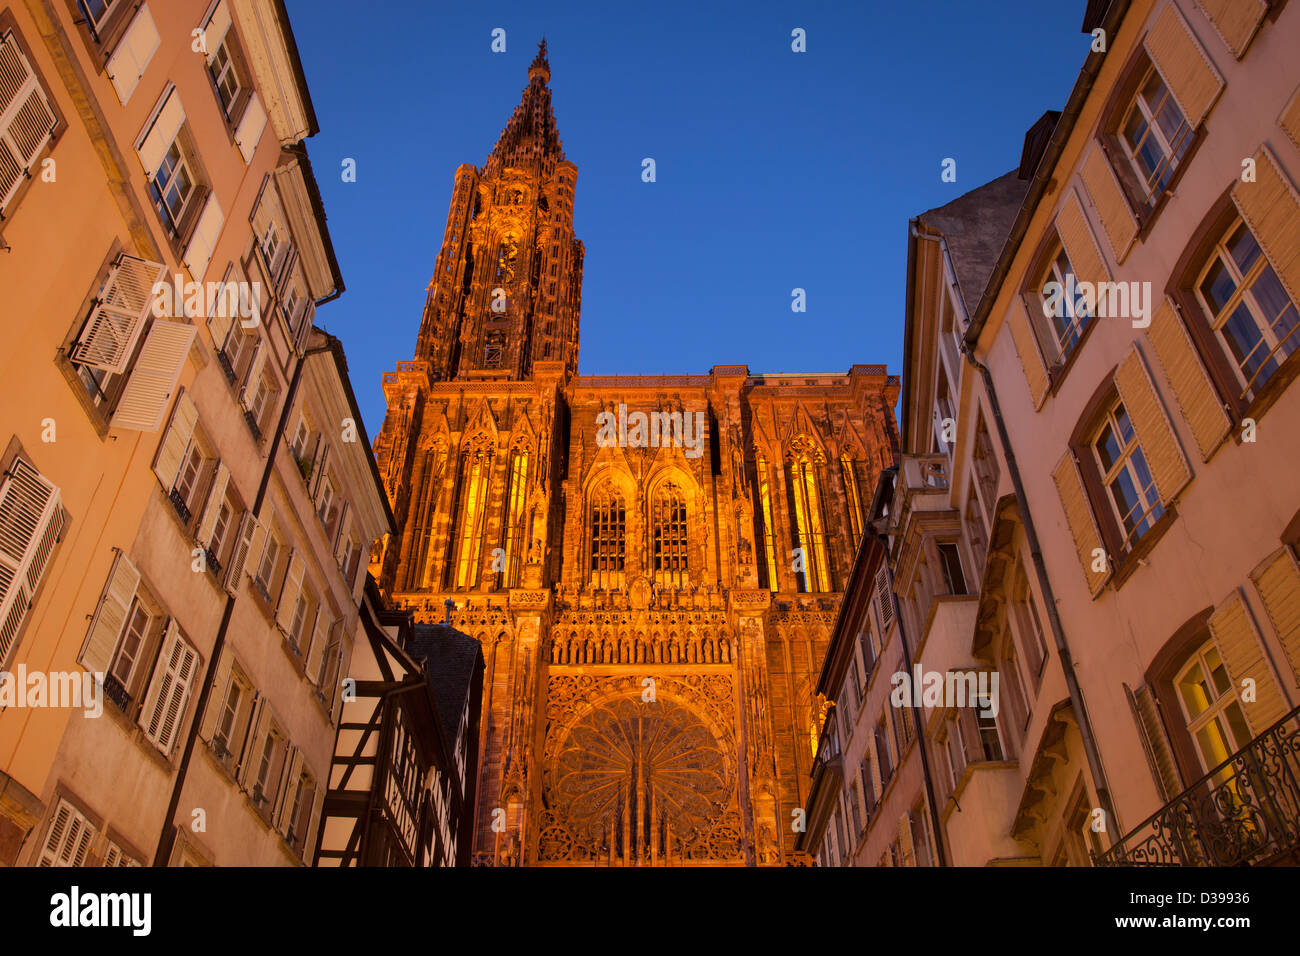 Ornate Strasbourg Cathedral towers over the buildings in Strasbourg, Alsace France Stock Photo